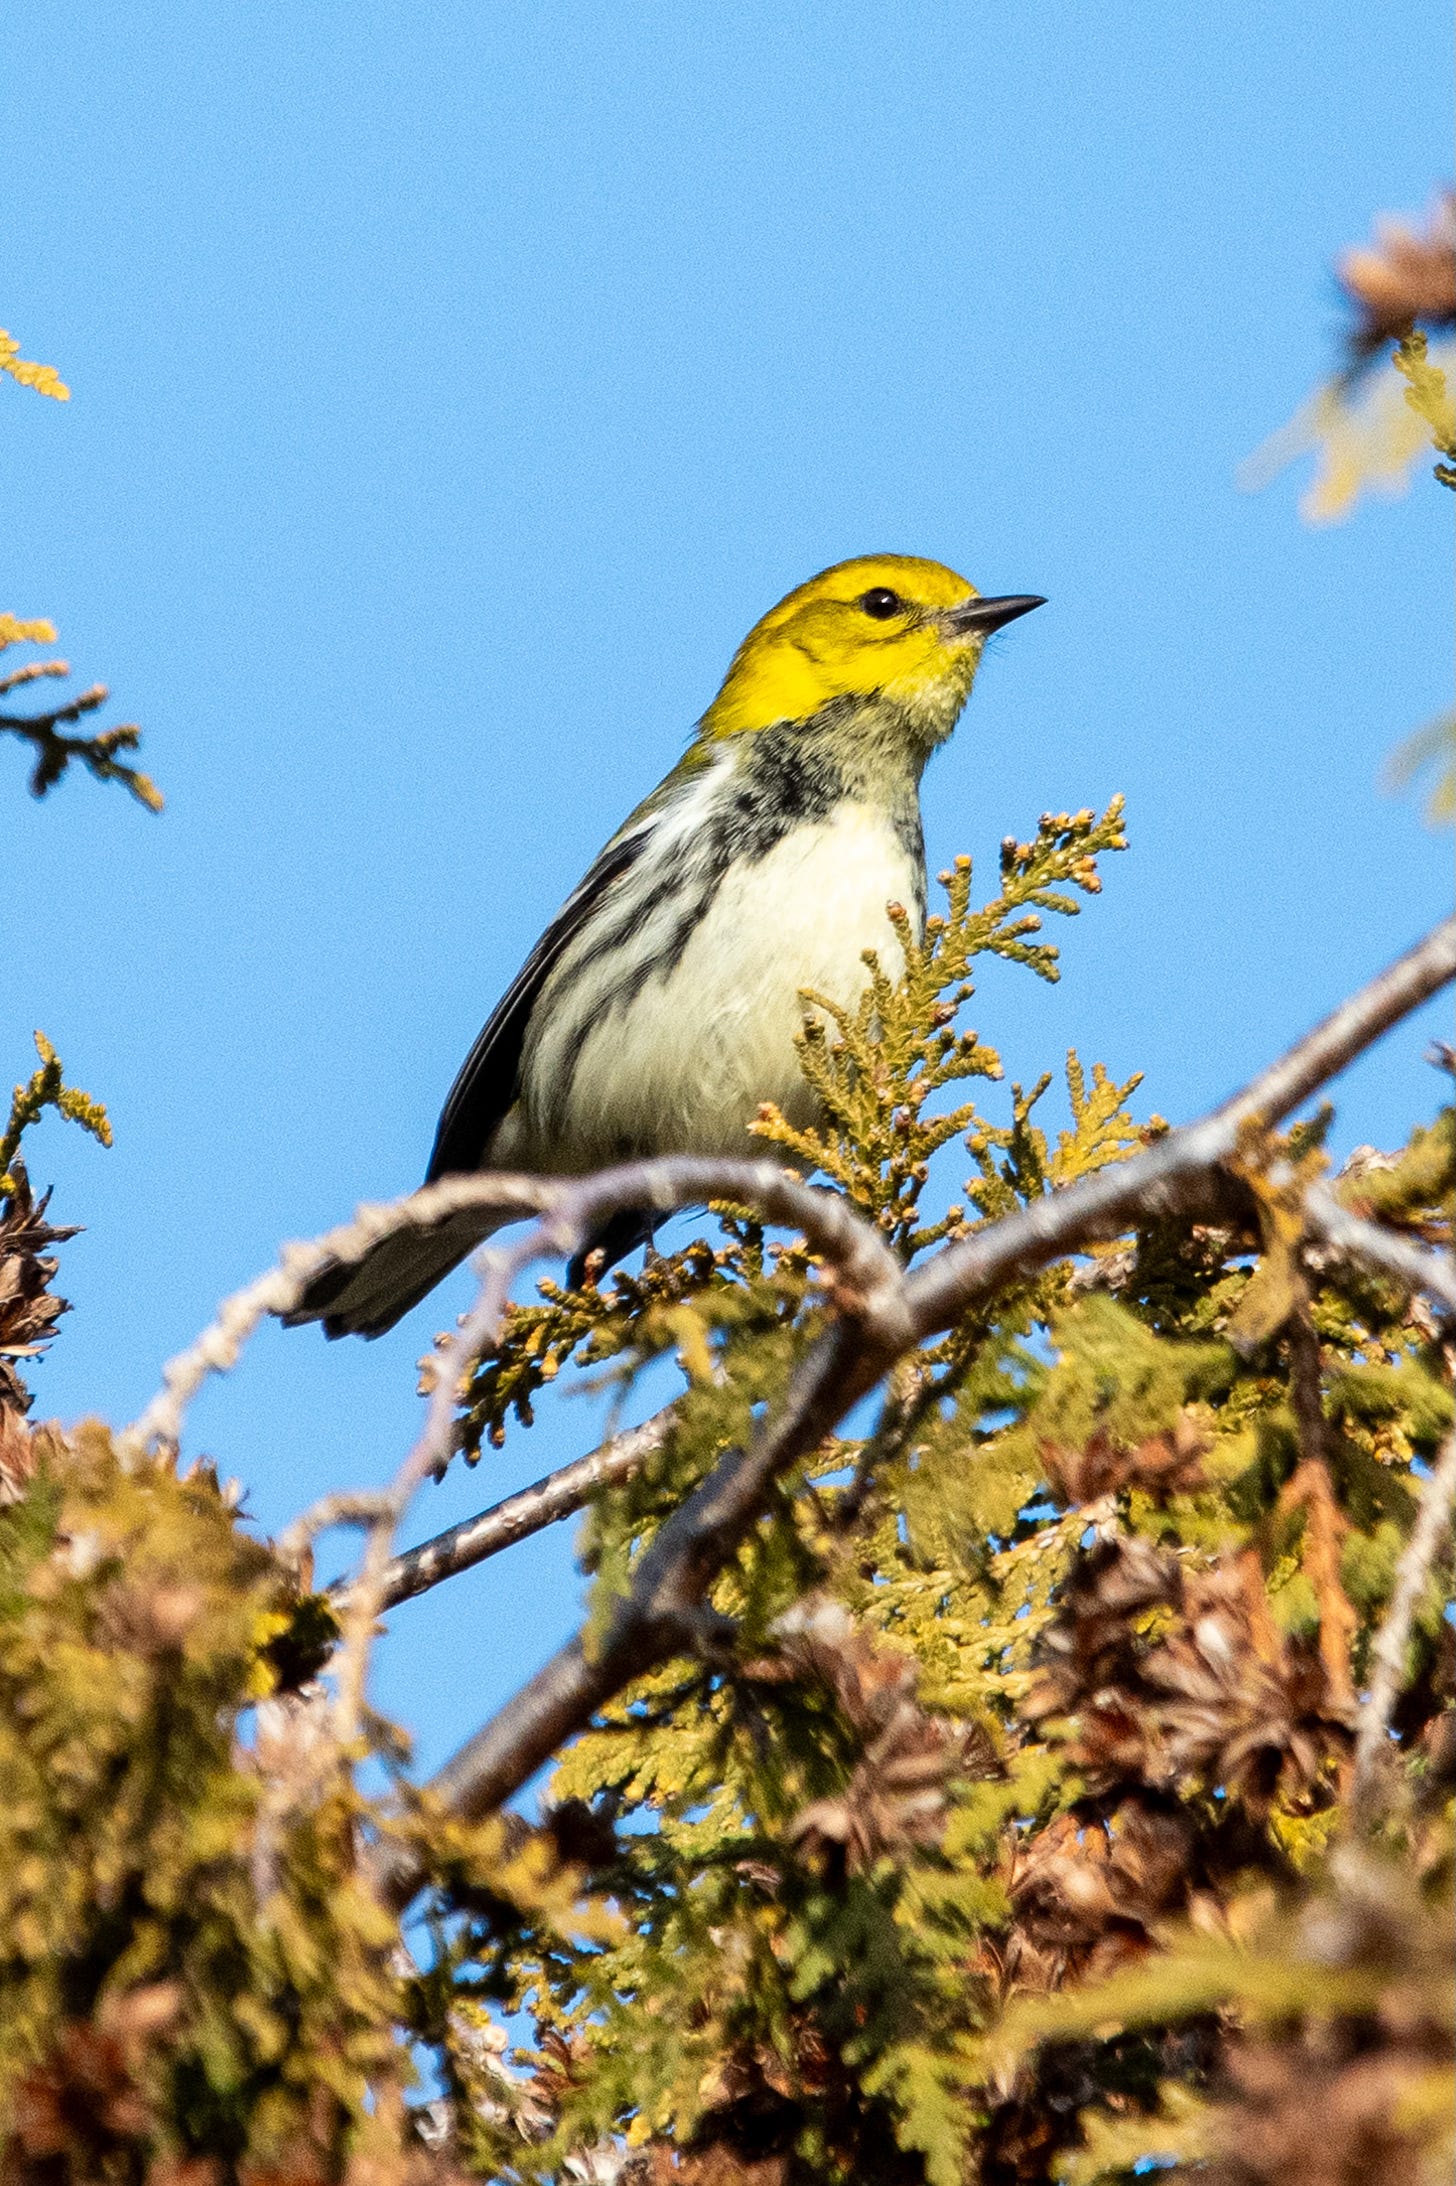 A black-throated green warbler perched high in a yew